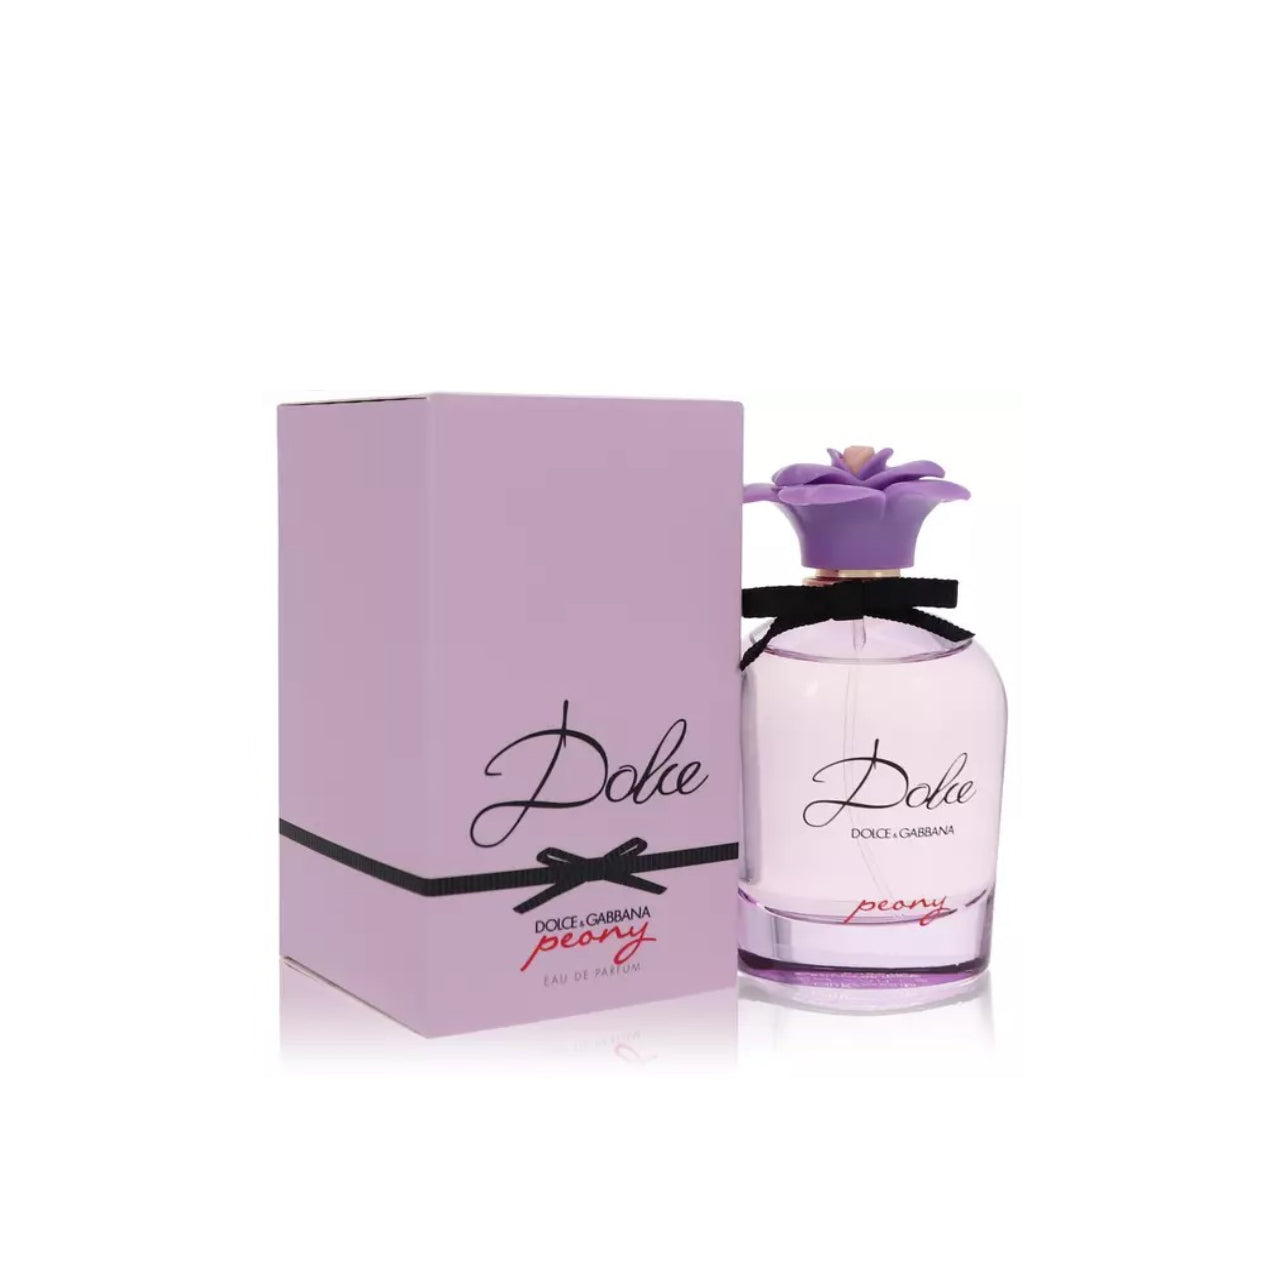 Dolce Peony Perfume for Women